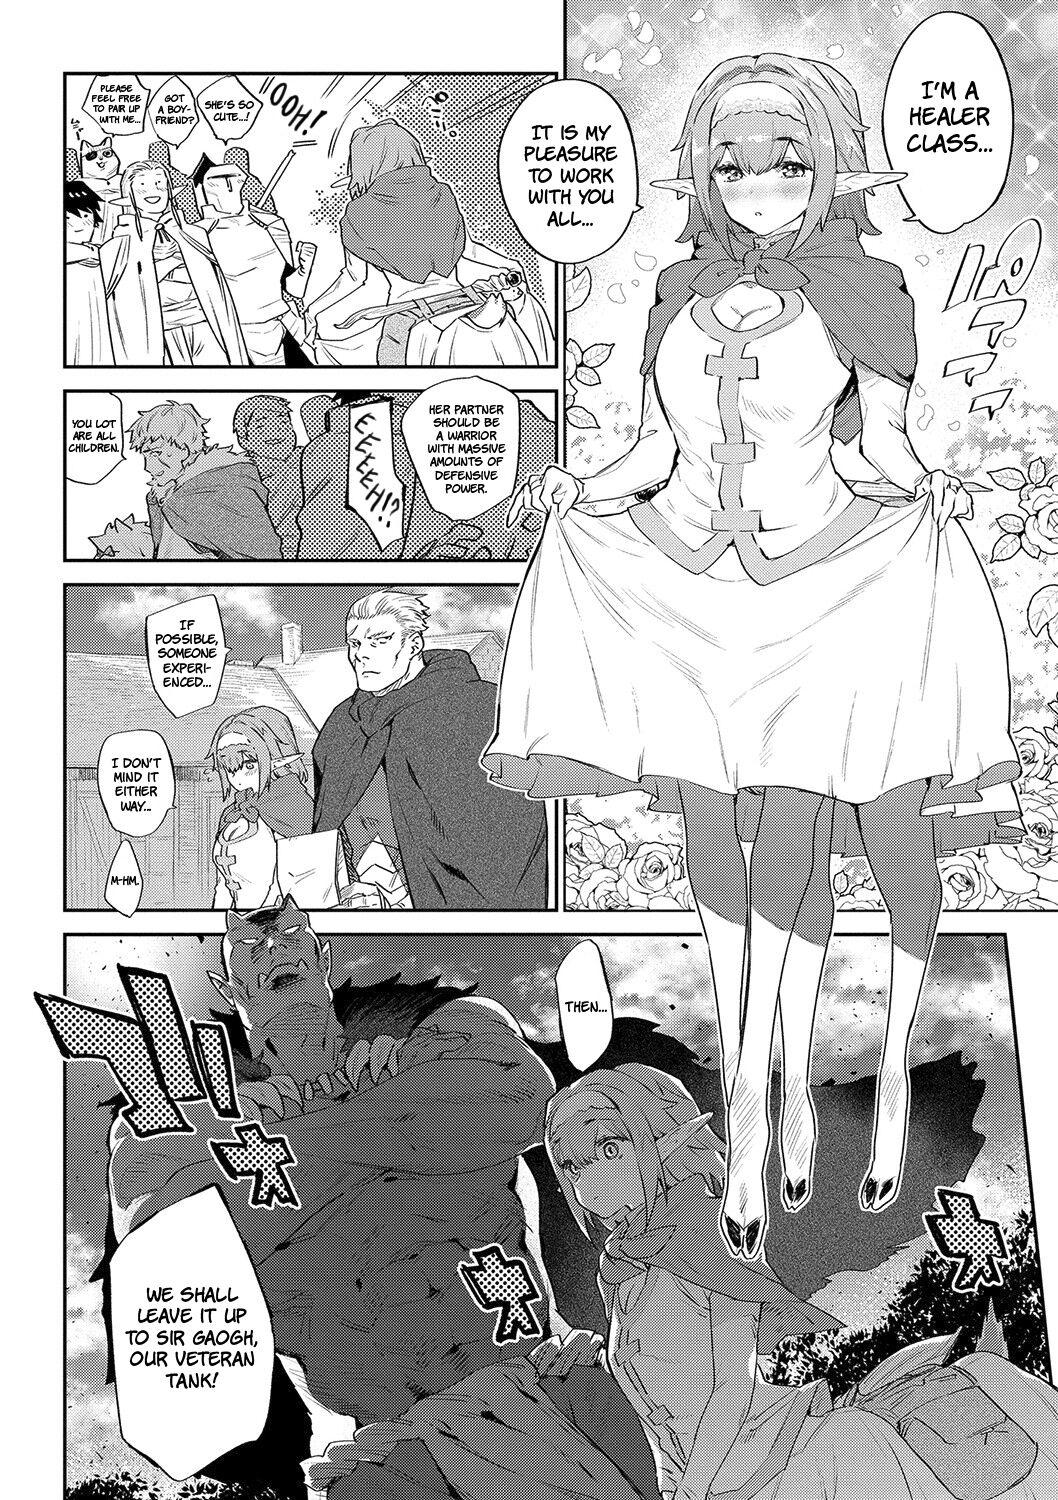 Furry Ihou no Otome - Monster Girls in Another World Teen - Page 5